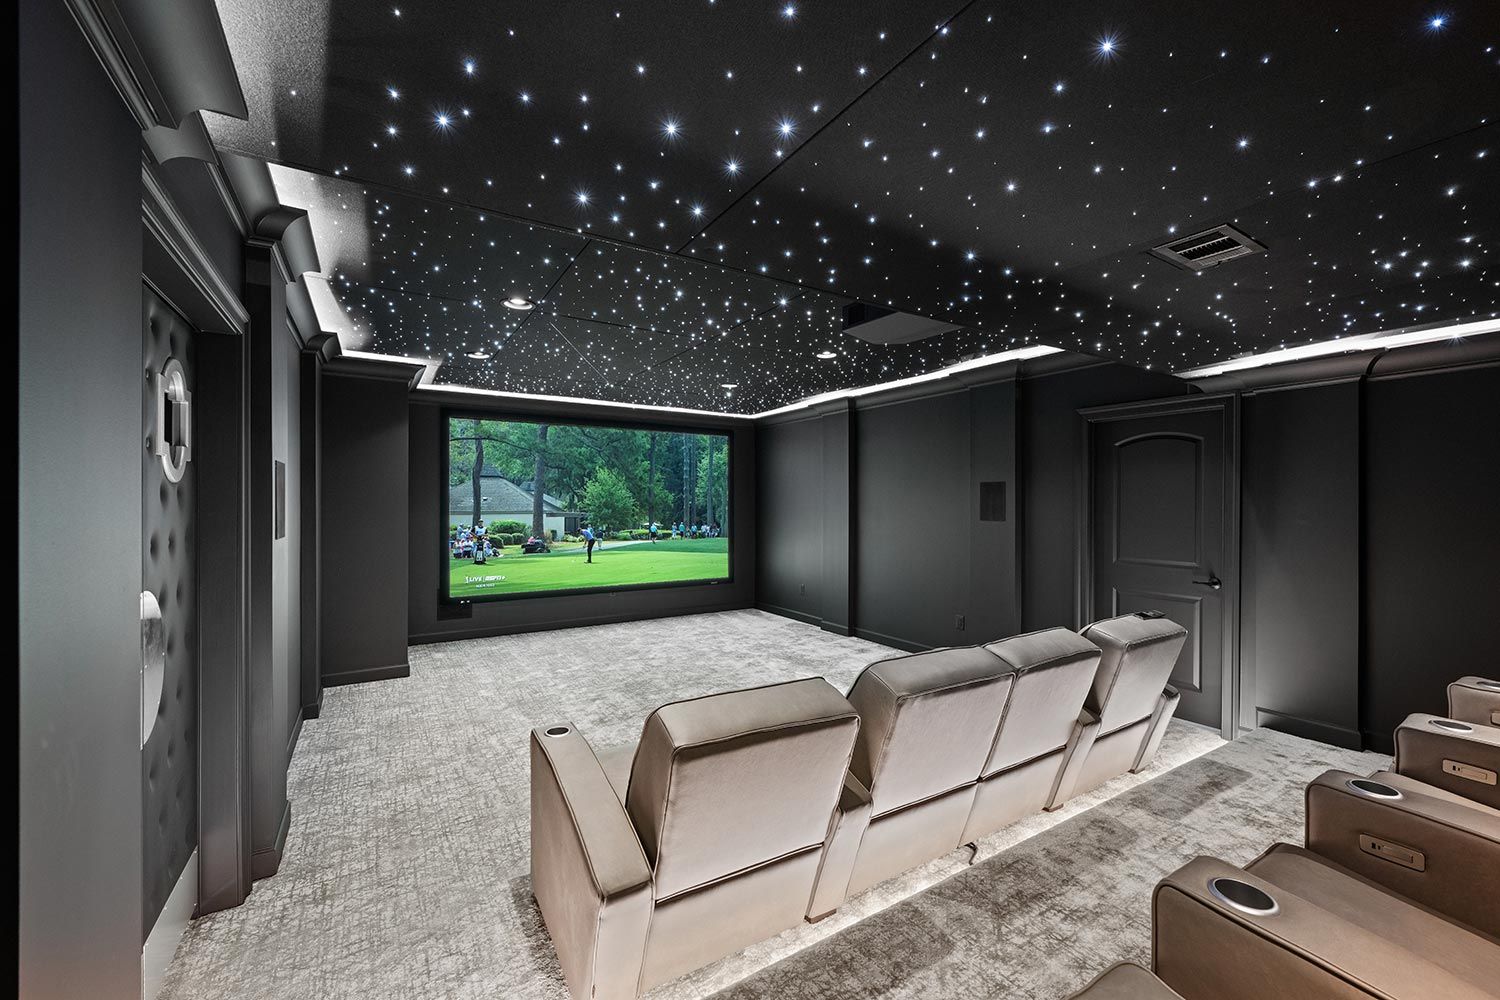 Modern home theater setup with a large screen, surrounded by a starry ceiling, providing a luxurious and immersive movie-watching experience.